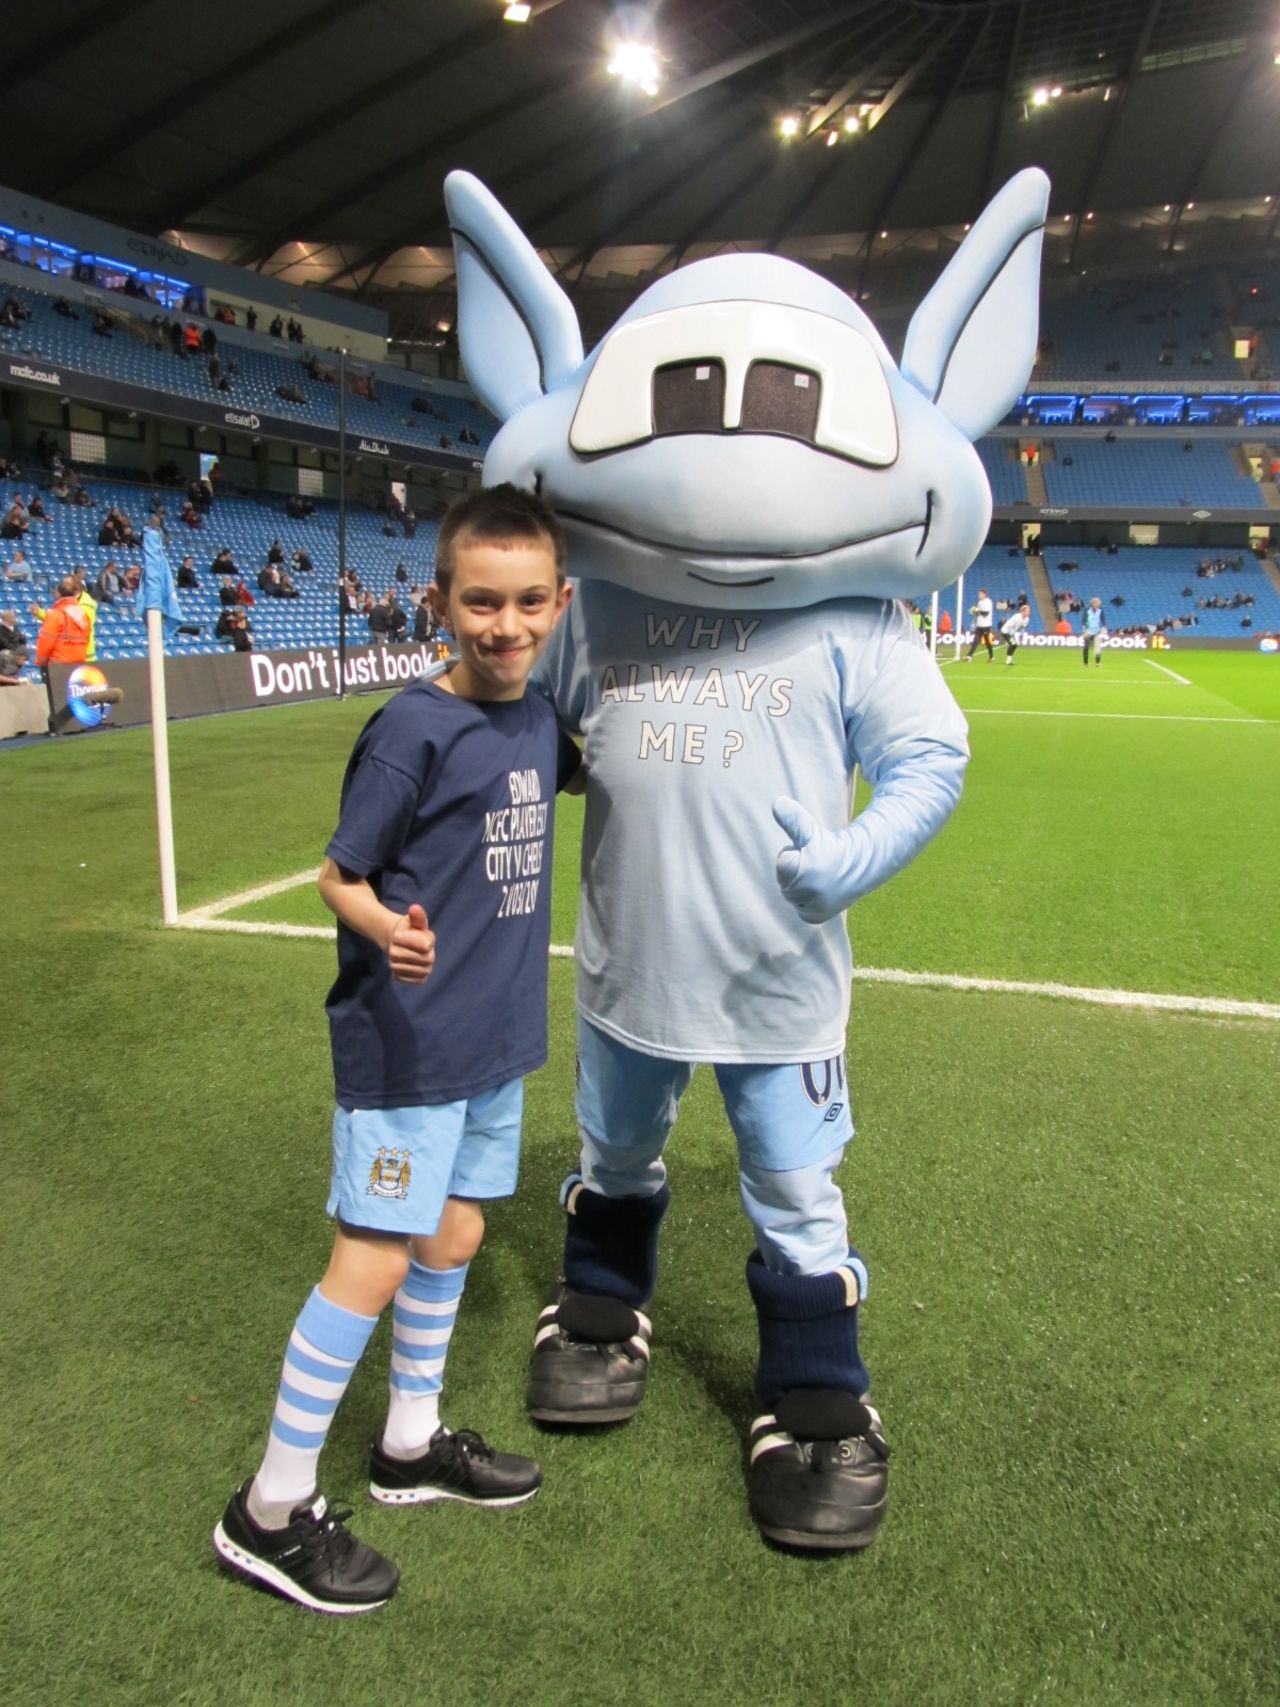 Edward, now 11, is a regular visitor to Manchester City, the English Premier League champion. On one occasion he met the club's mascot.